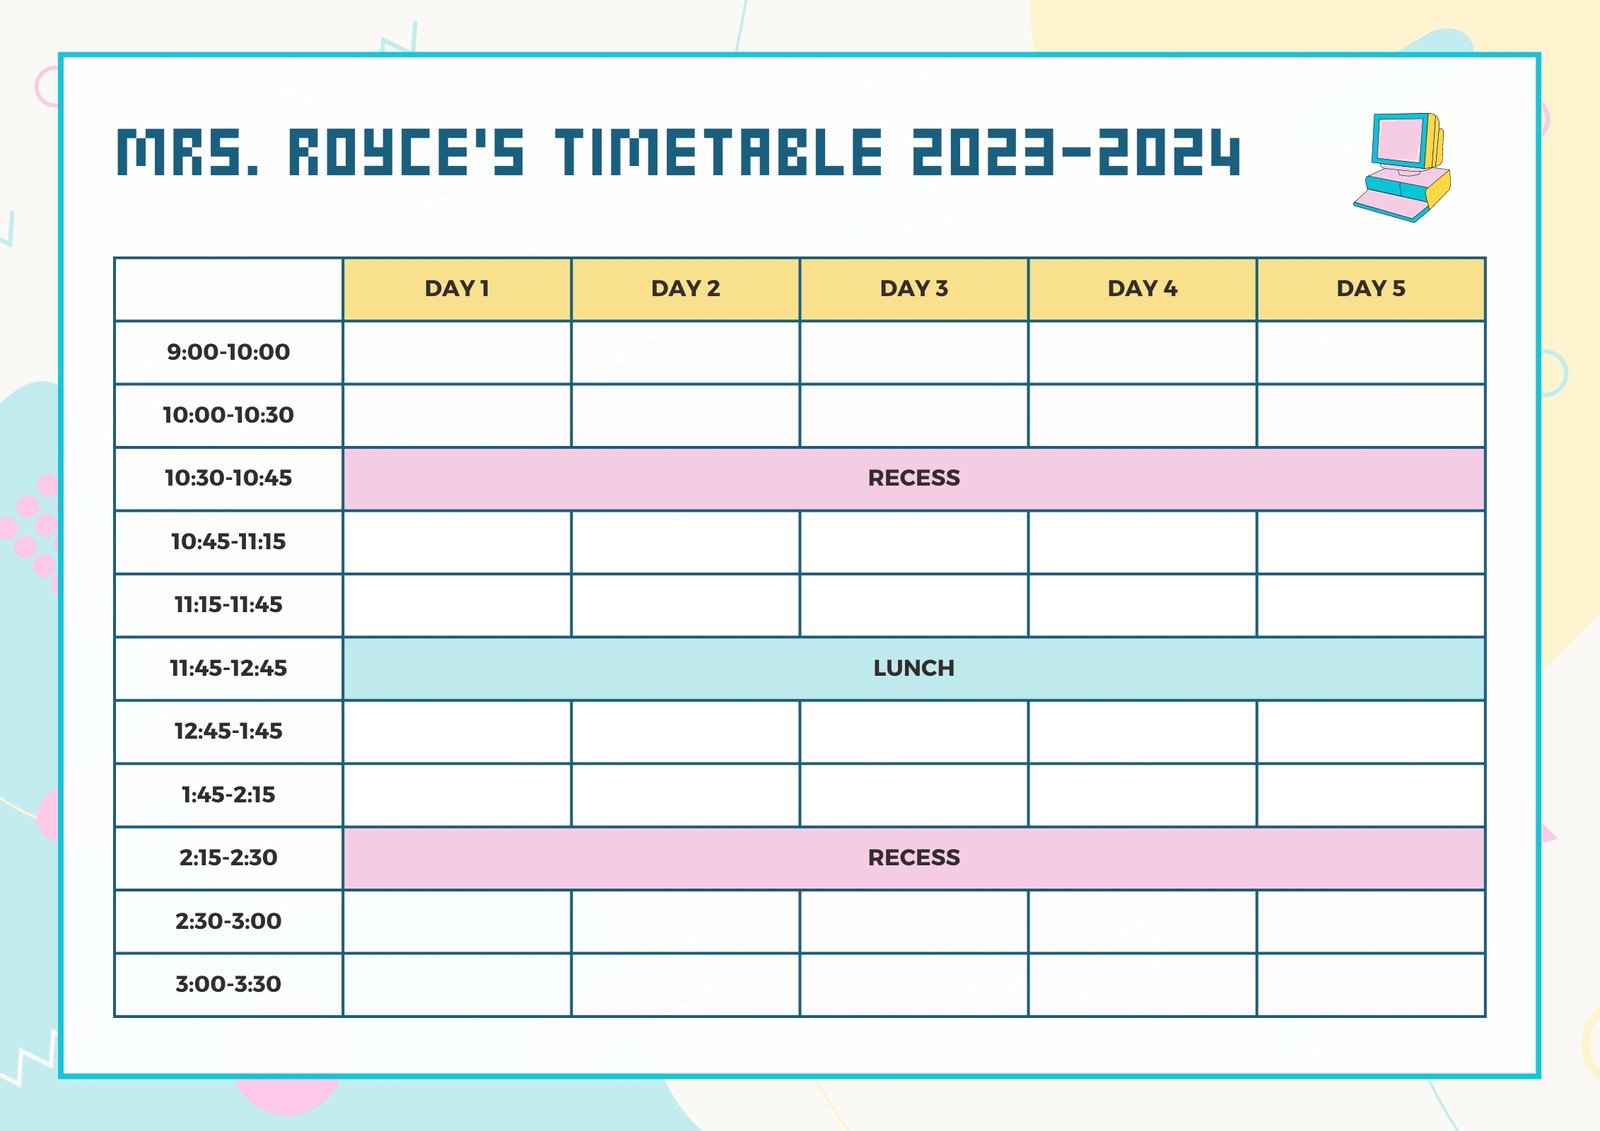 Teacher Timetable Class Schedule Pink and White Retro